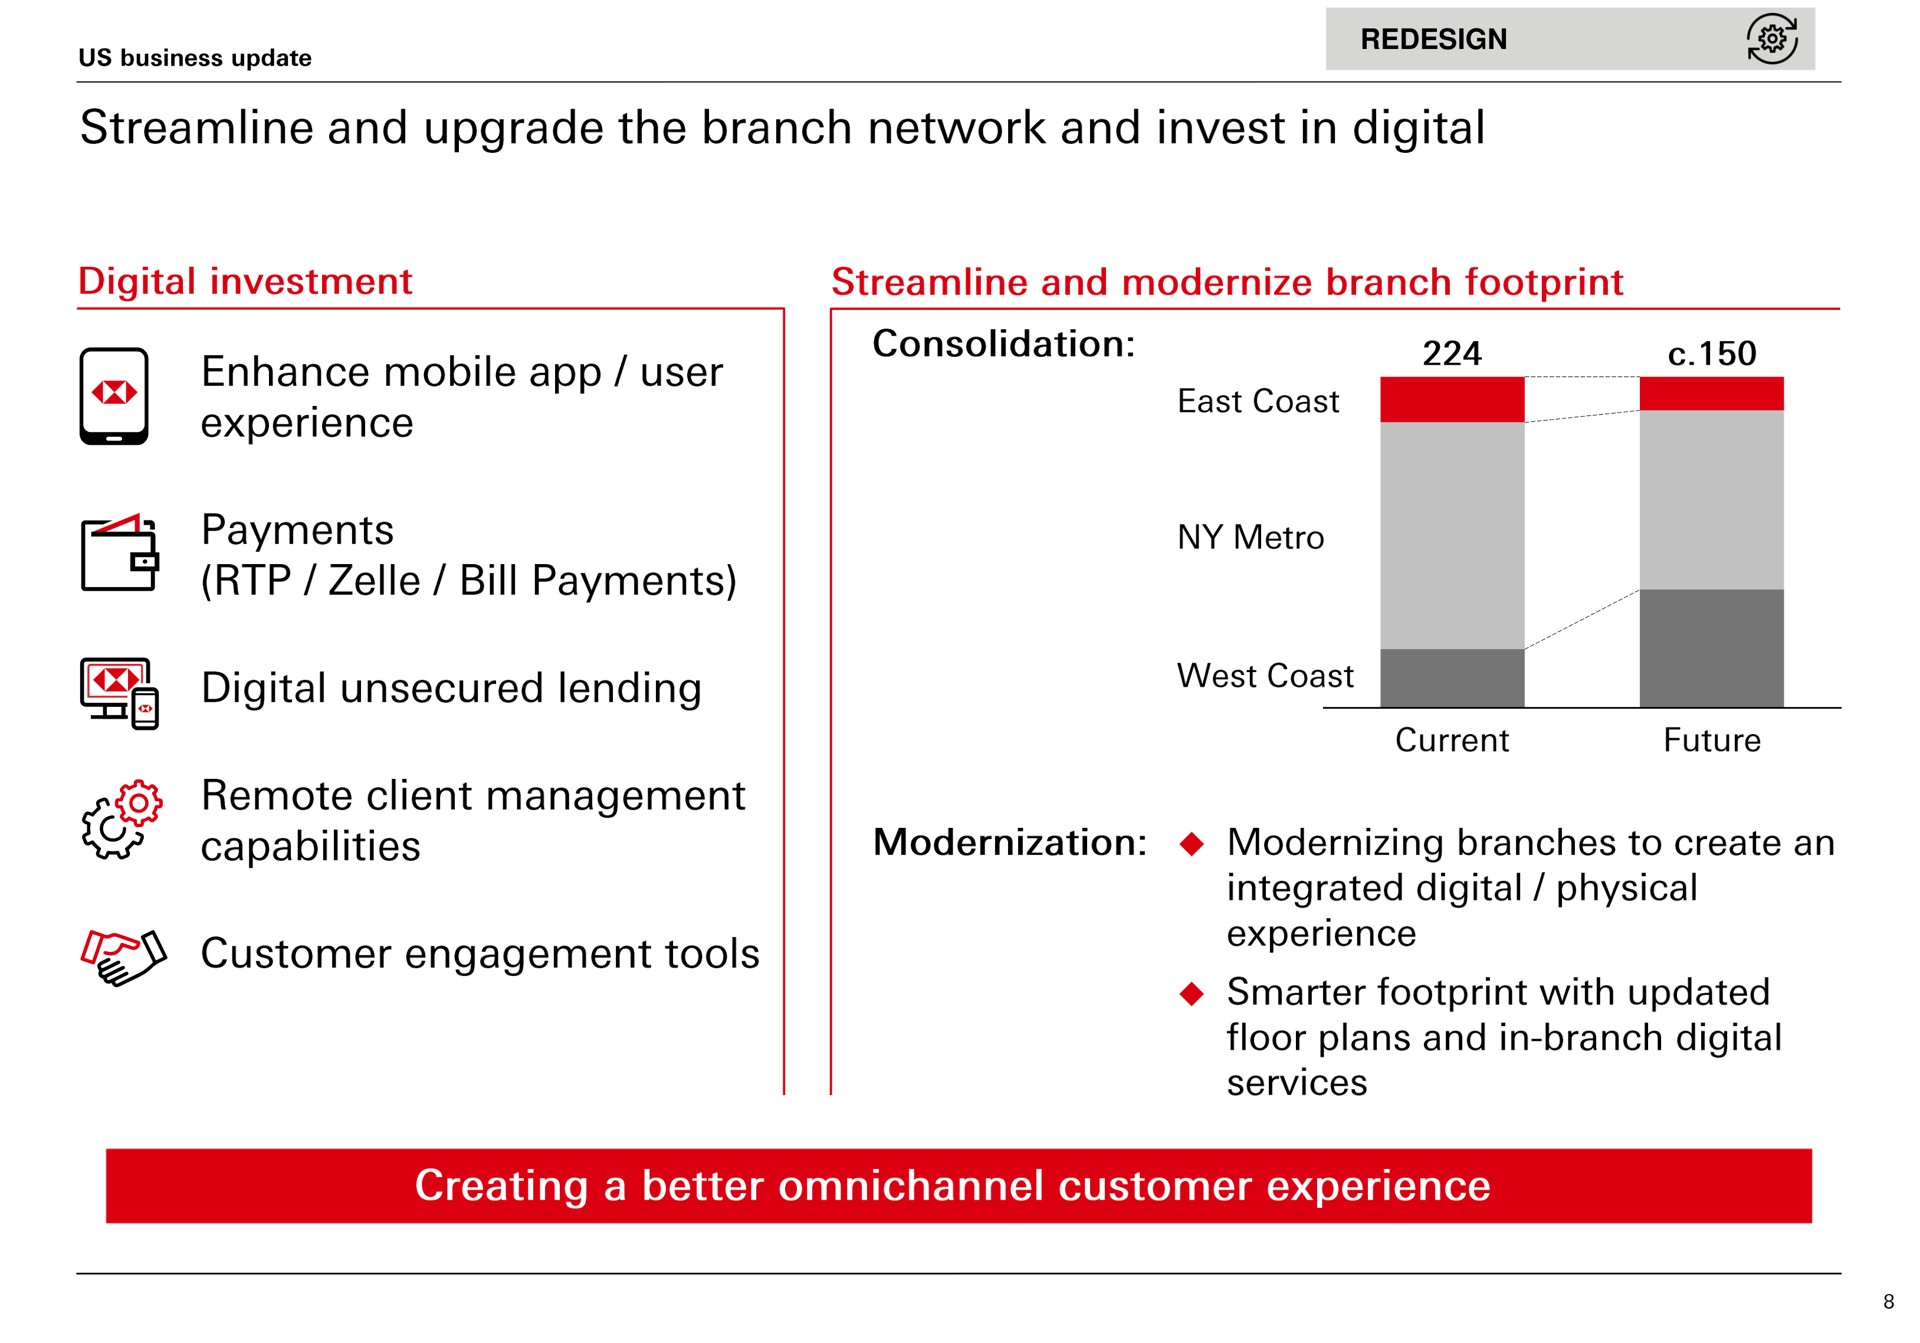 redesign streamline and upgrade the branch network and invest in digital enhance mobile user bill payments digital unsecured lending west coast remote client management customer engagement tools modernization branch modernizing creating a better customer experience | HSBC